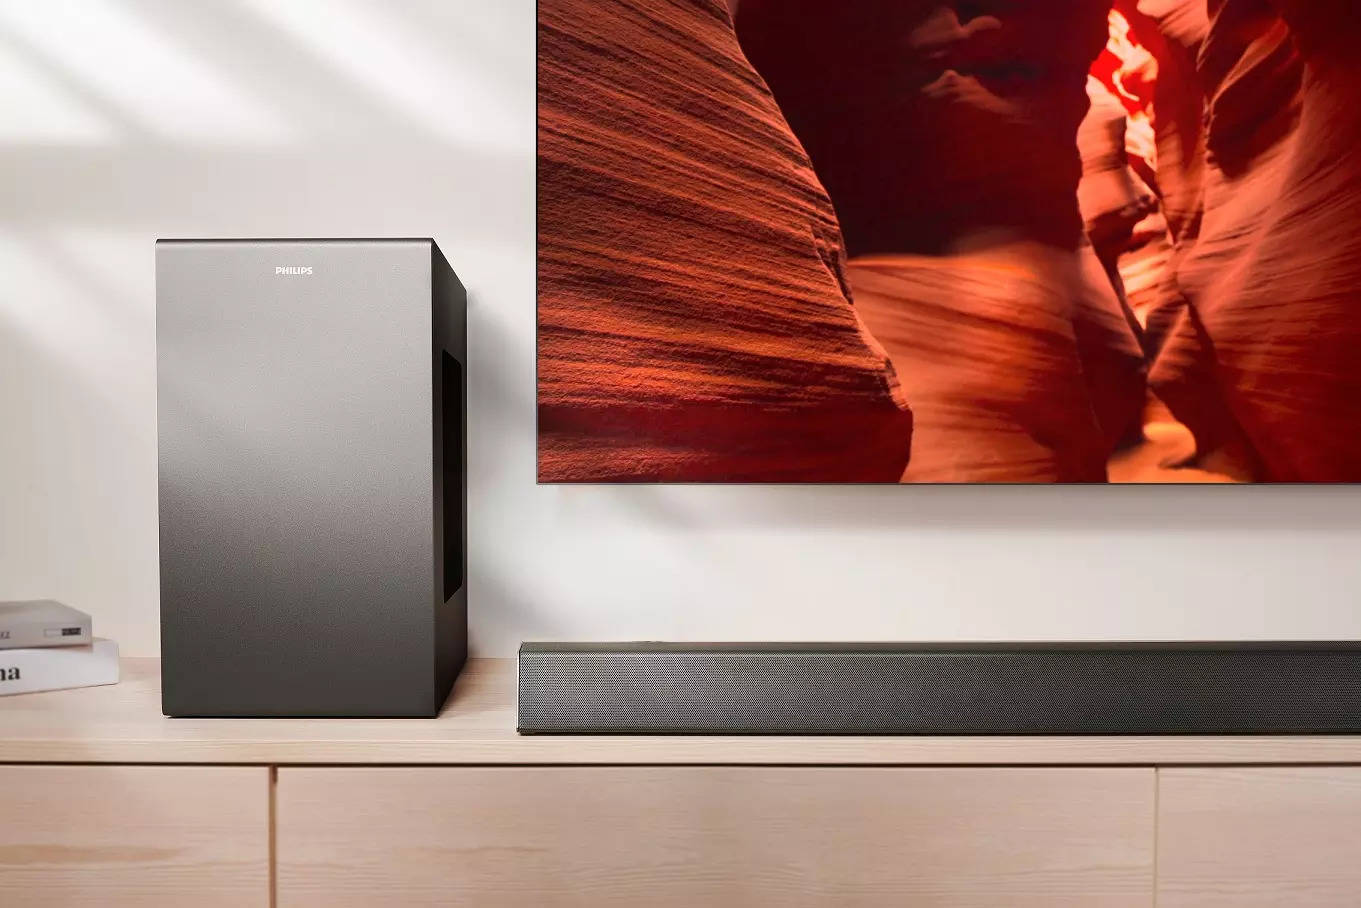 Philips TAB8947 and TAB7807 Dolby Atmos Soundbars with wireless subwoofer launched in India.